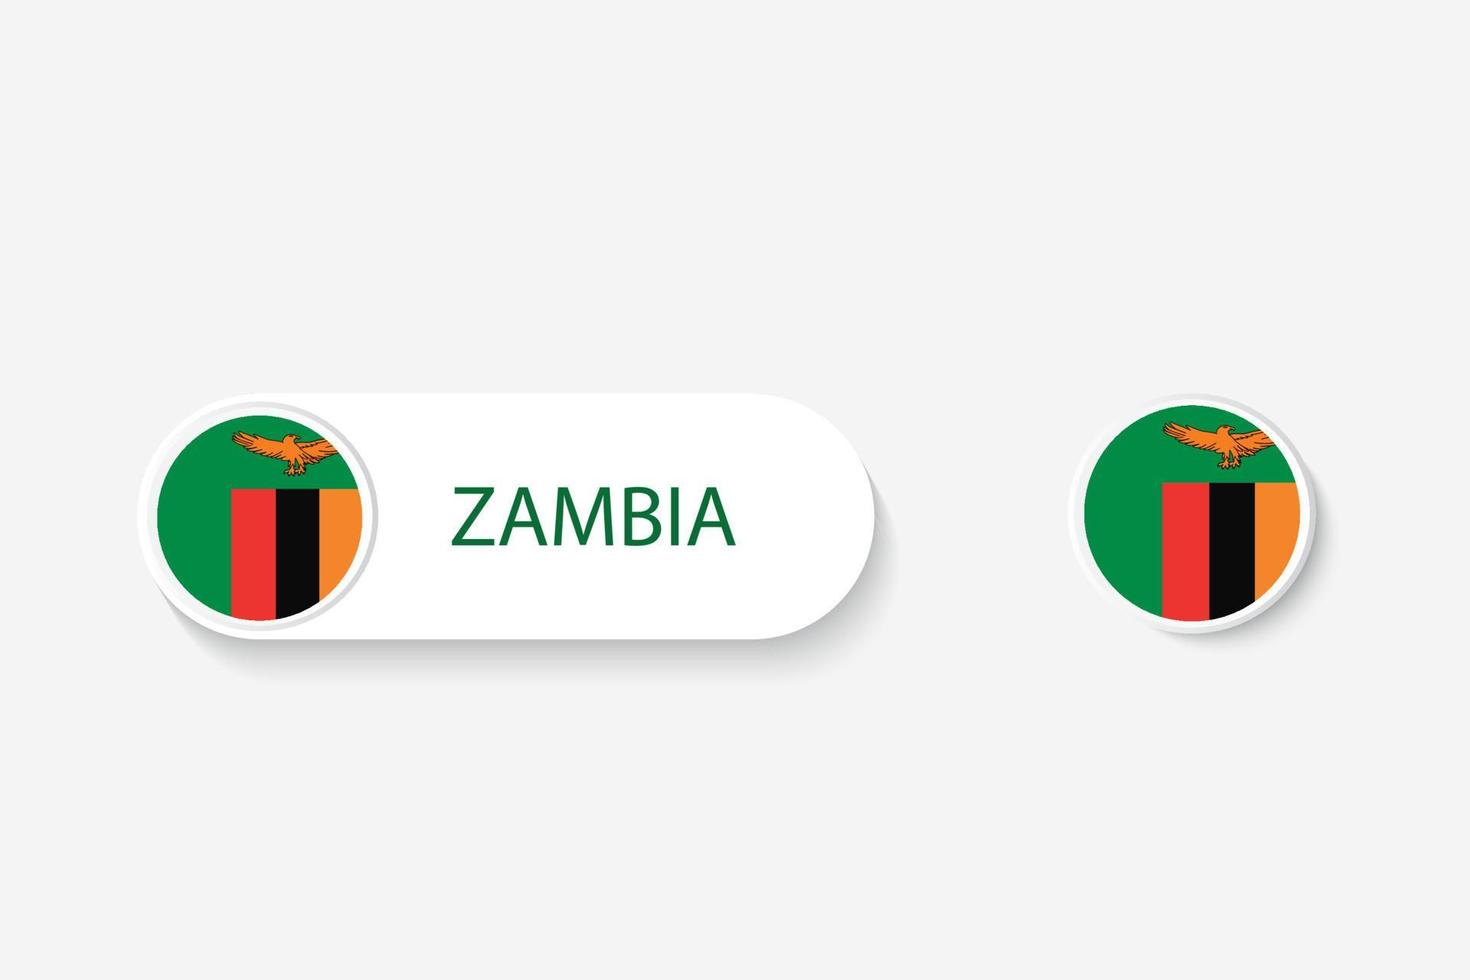 Zambia button flag in illustration of oval shaped with word of Zambia. And button flag Zambia. vector